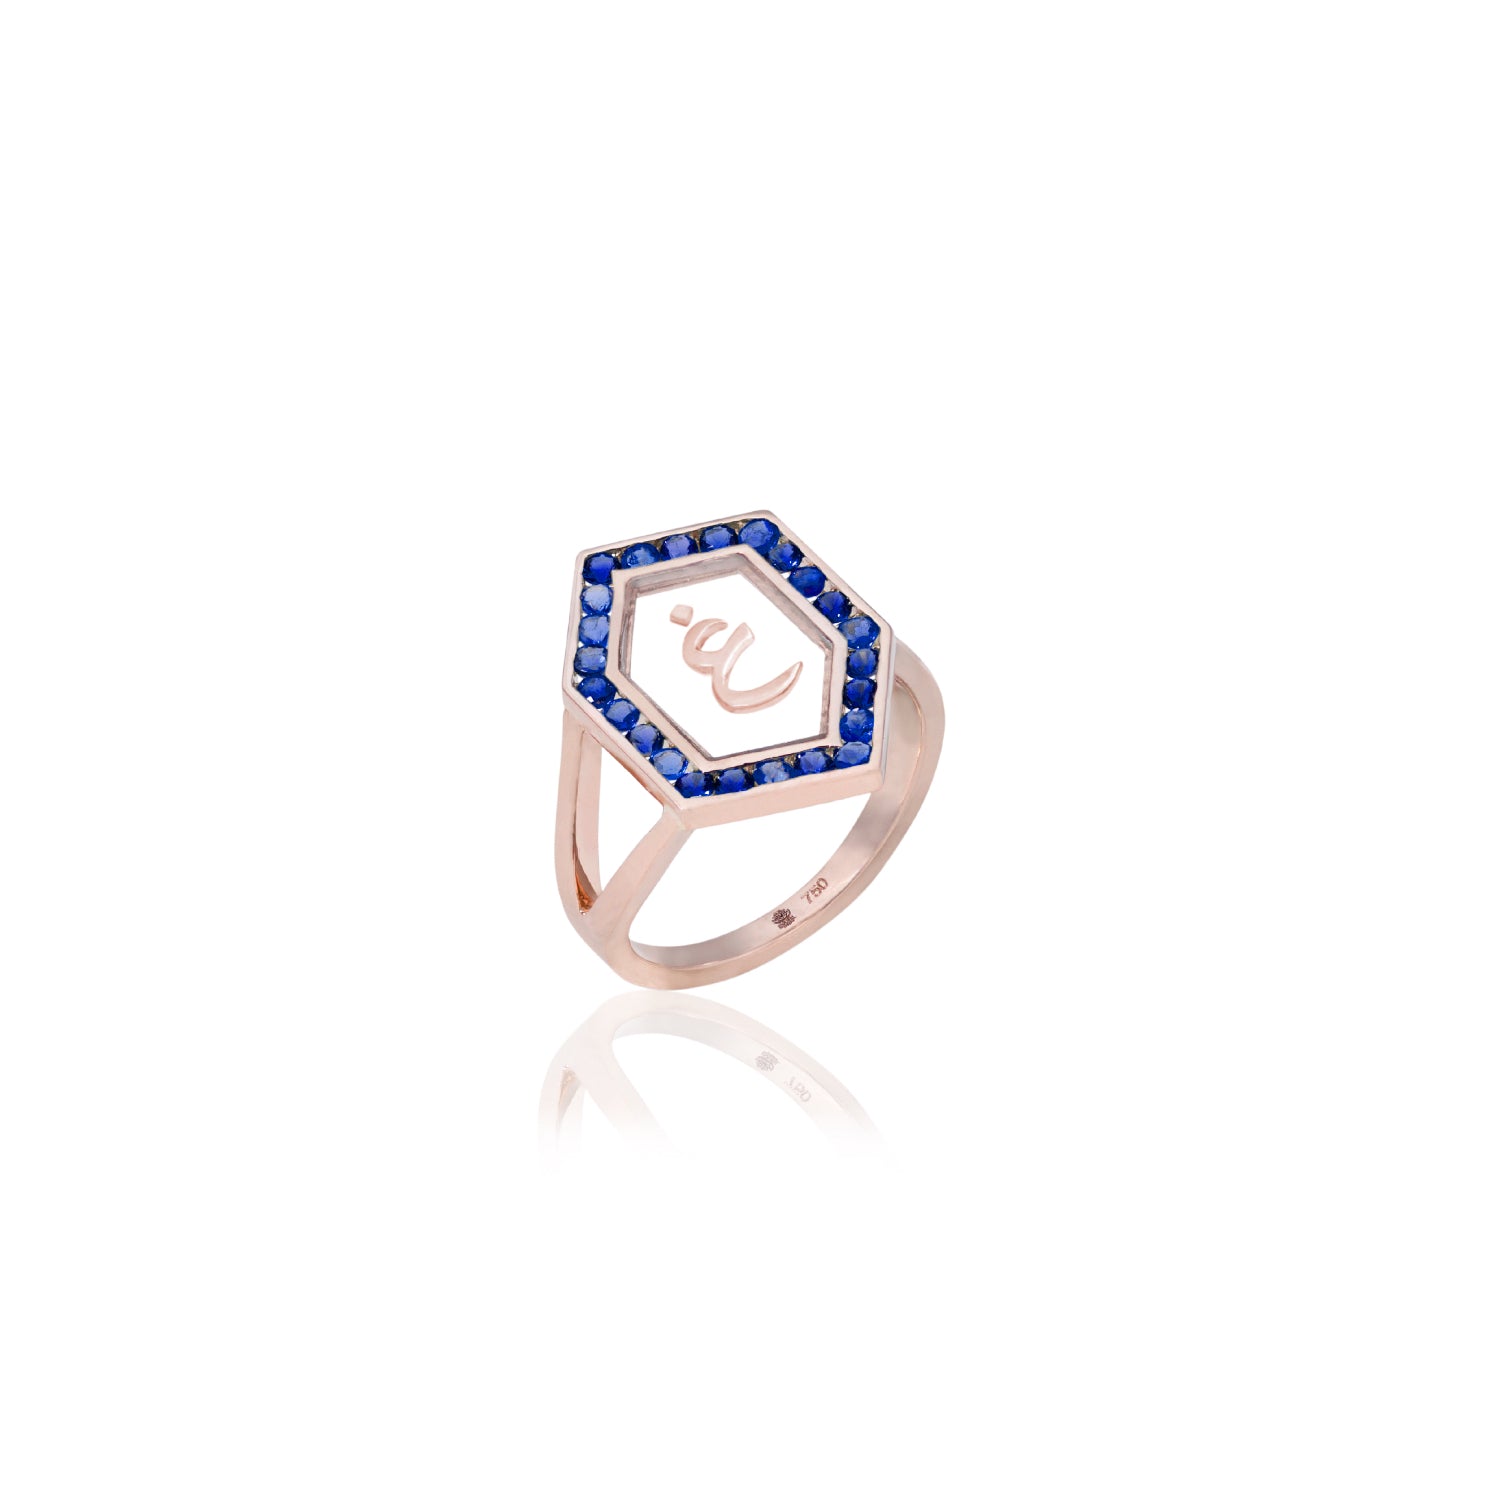 Qamoos 1.0 Letter غ Sapphire Ring in Rose Gold